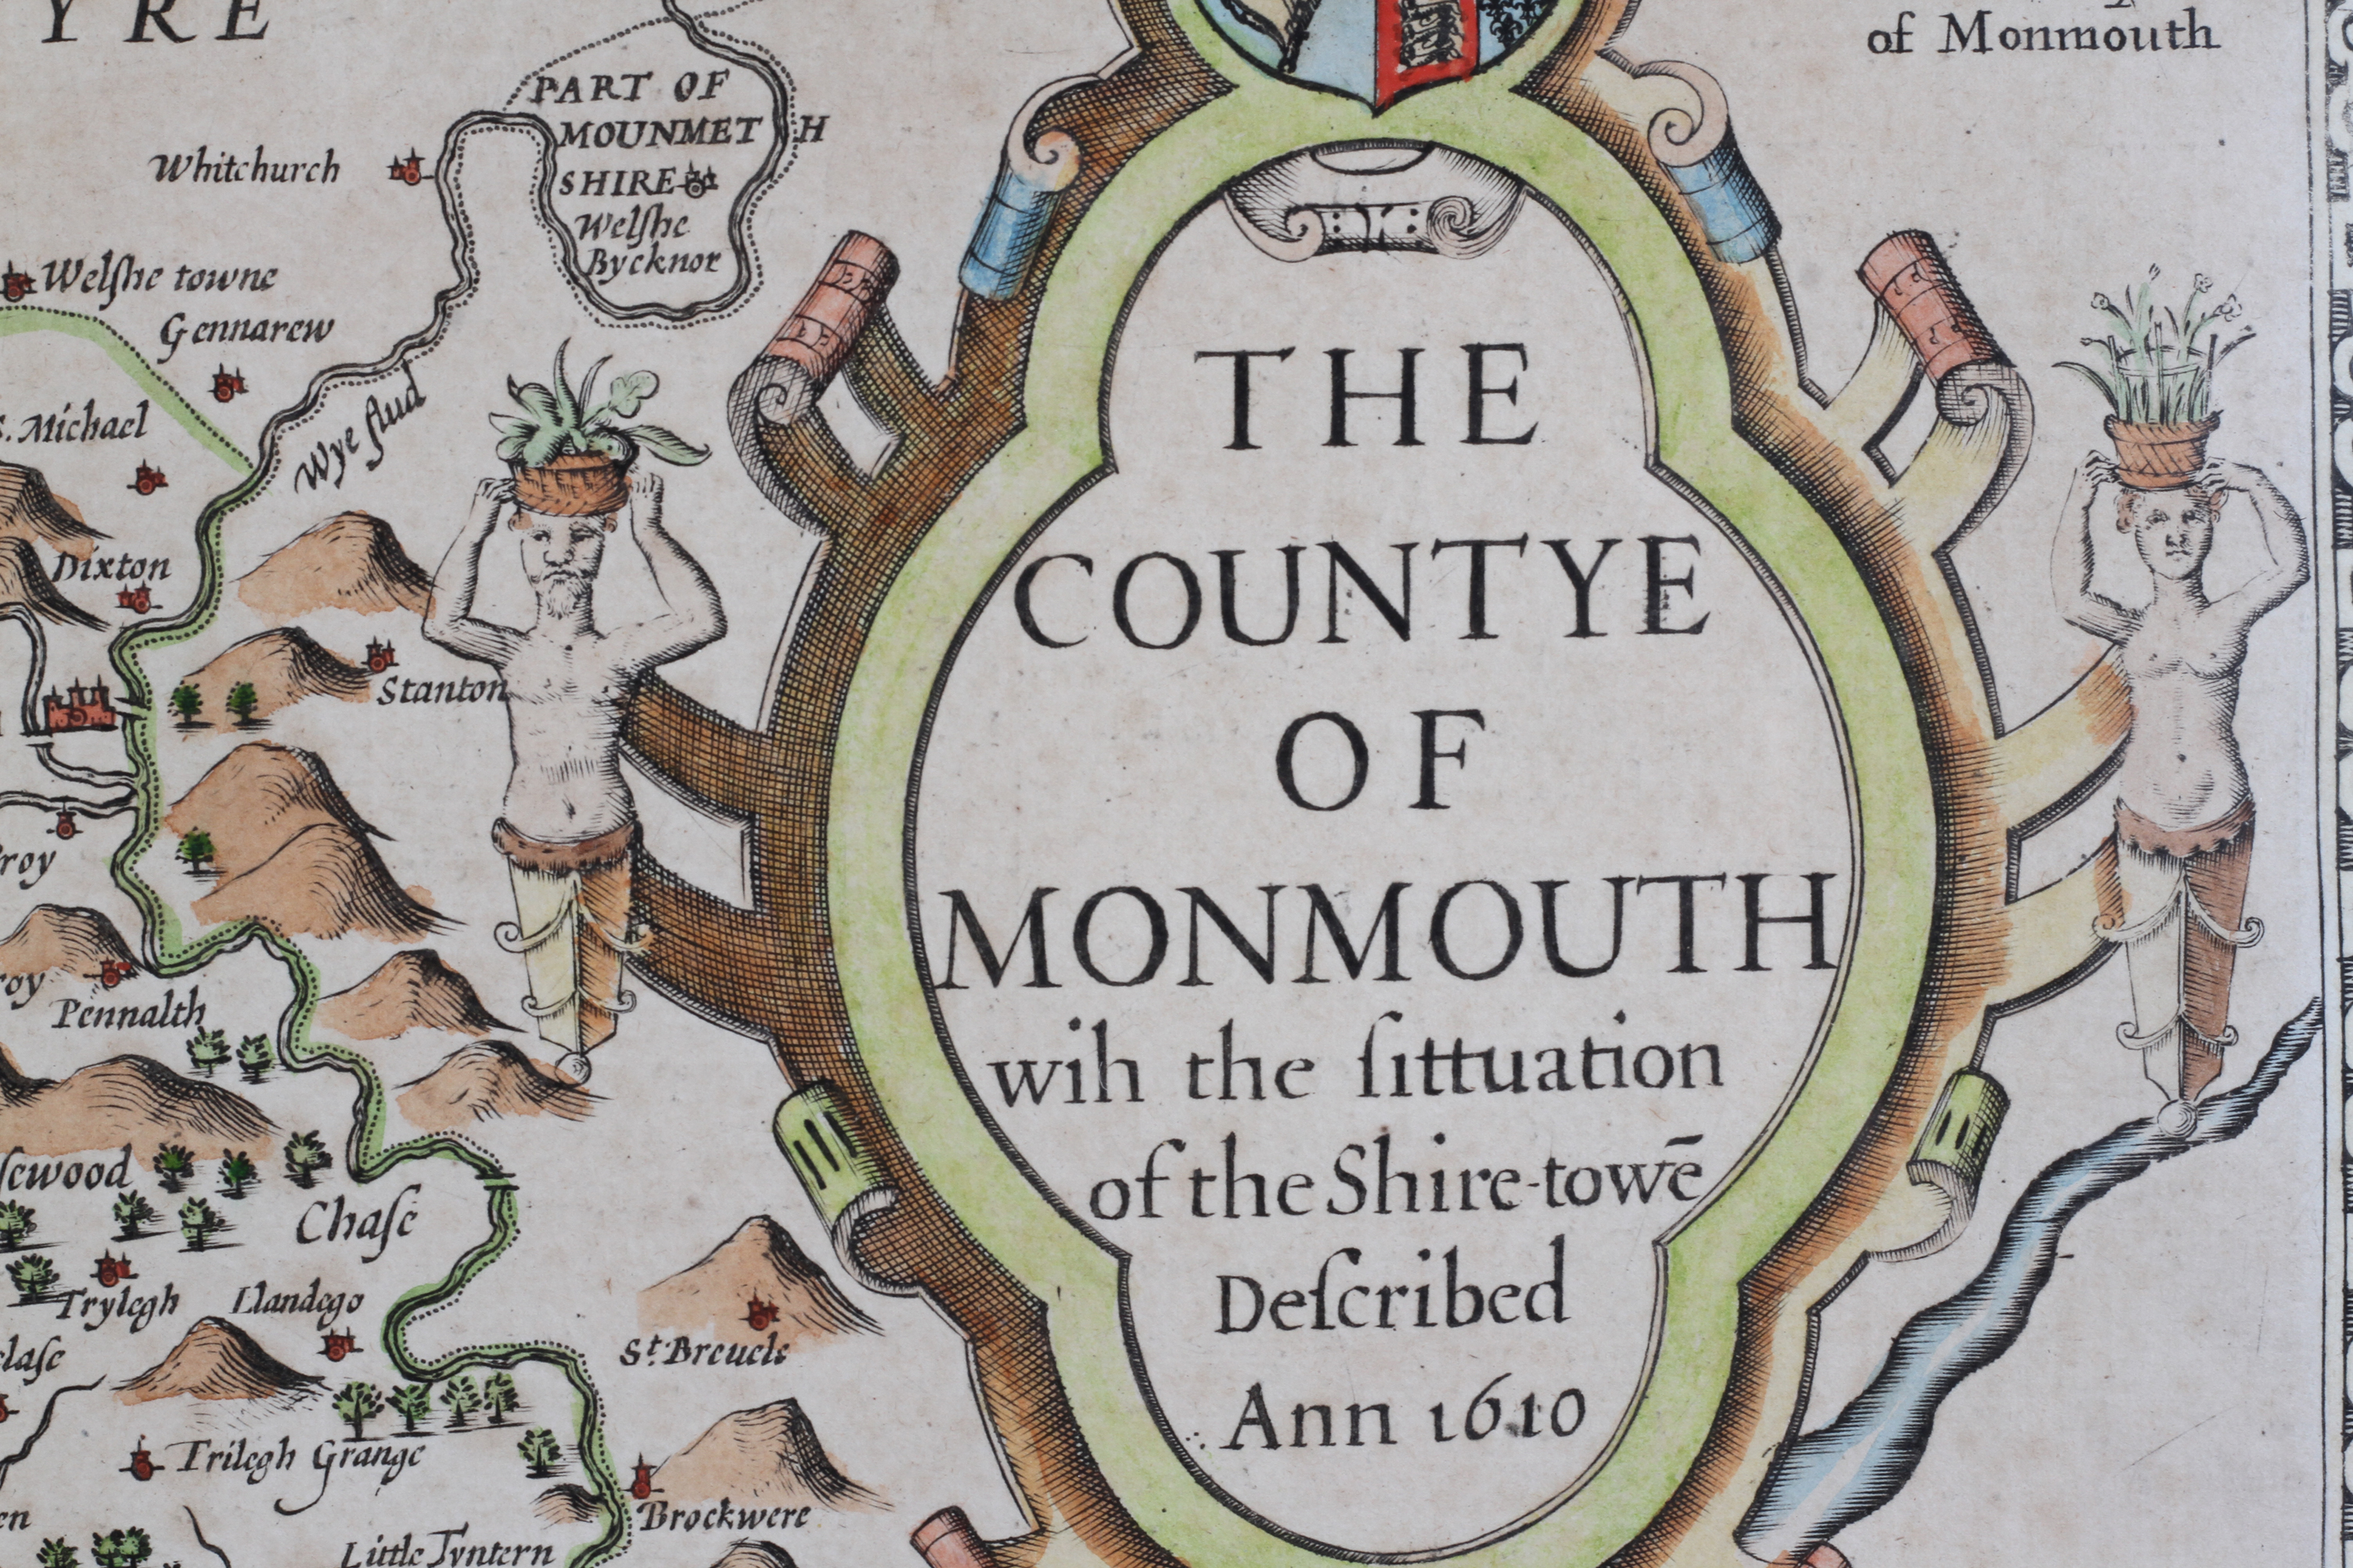 John Speed 'The Countye of Monmouth', 17th century map engraving, later coloured, - Image 2 of 3